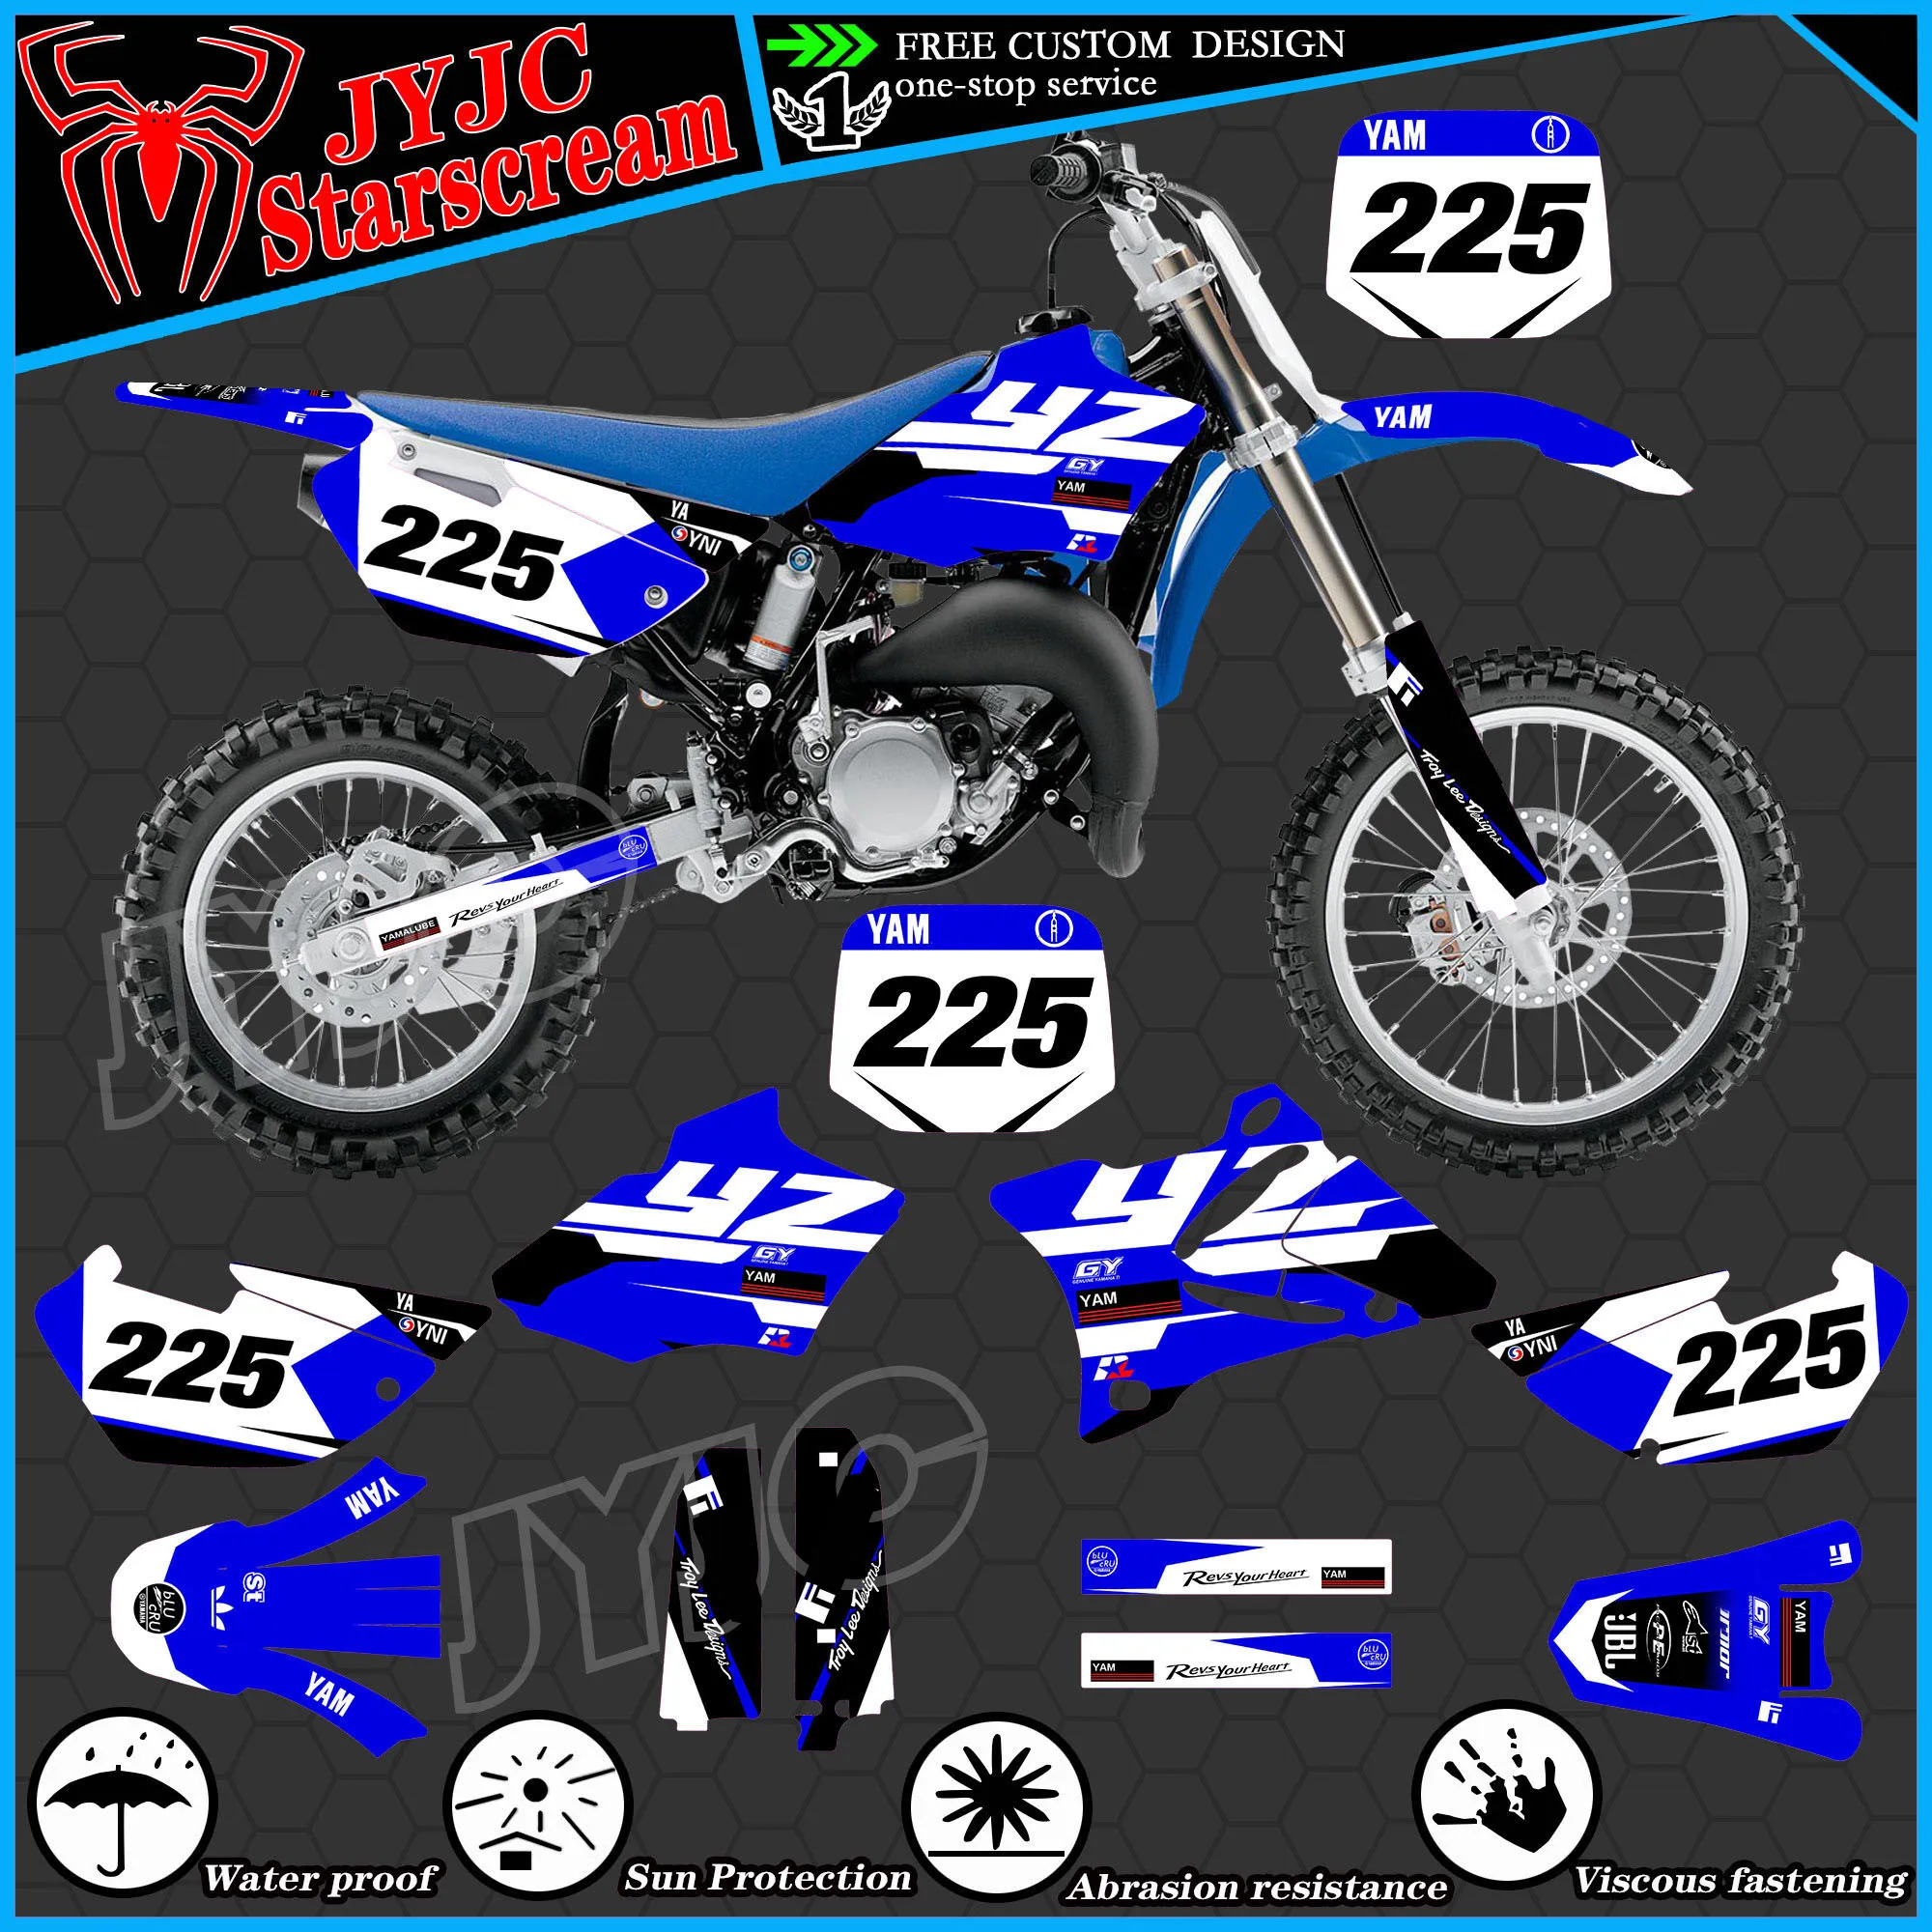 Graphic Kit for YAMAHA 2002 2003 2004 2005 2006 2007 2008 2009 2010 2011 2012 2013 2014 YZ85 Motorcycle Decal Stickers remotekey auto remote key fob 3 button 434mhz for ford 2004 2005 2006 2007 2008 2009 2010 2011 2012 remote control